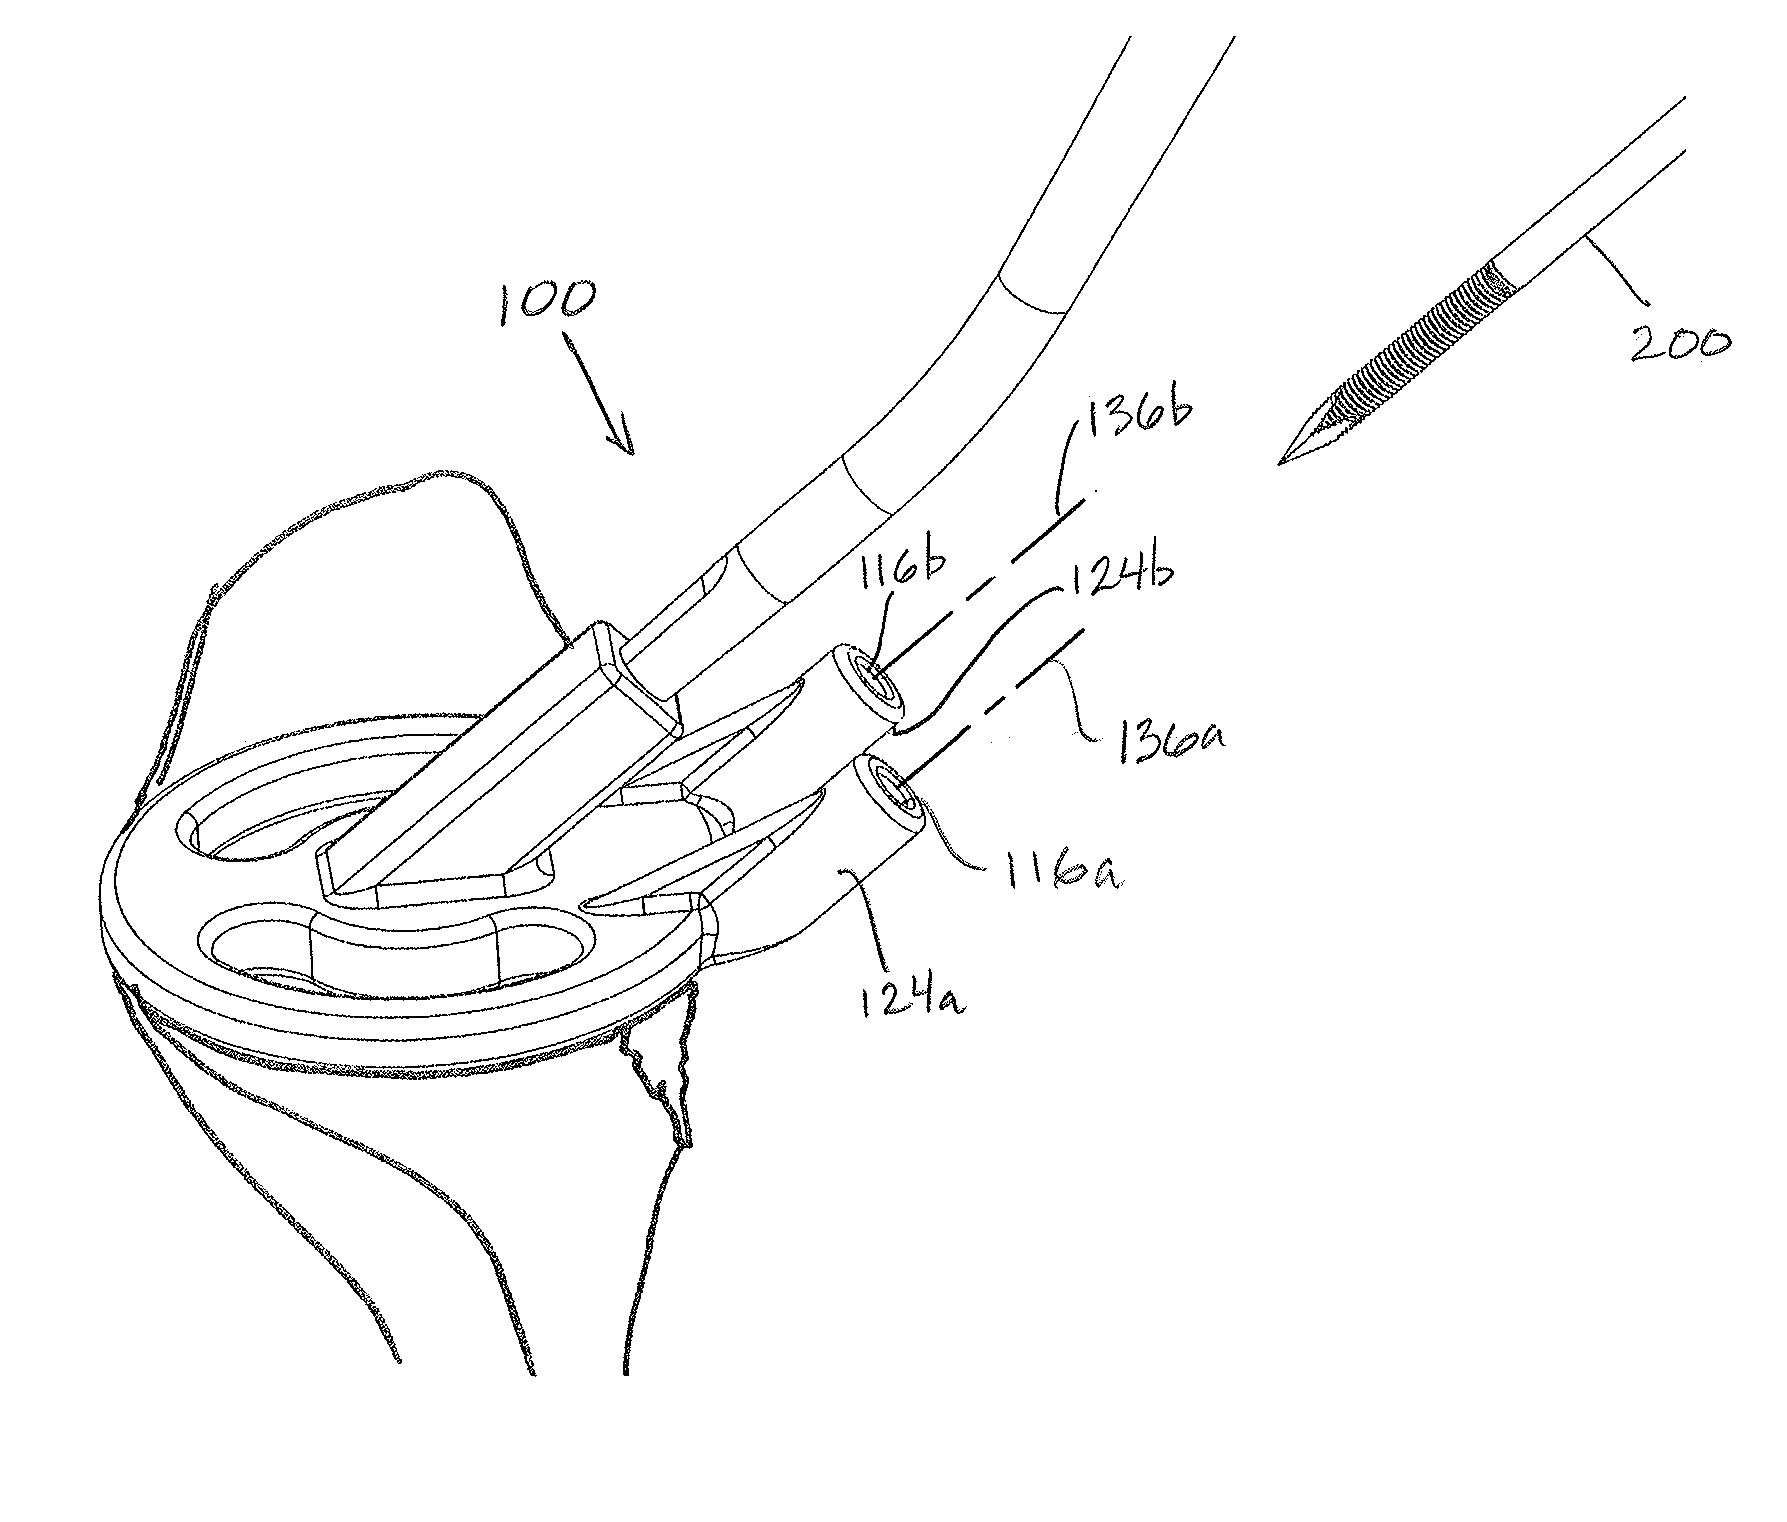 Devices, Apparatuses, Kits, and Methods for Repair of Articular Surface and/or Articular Rim